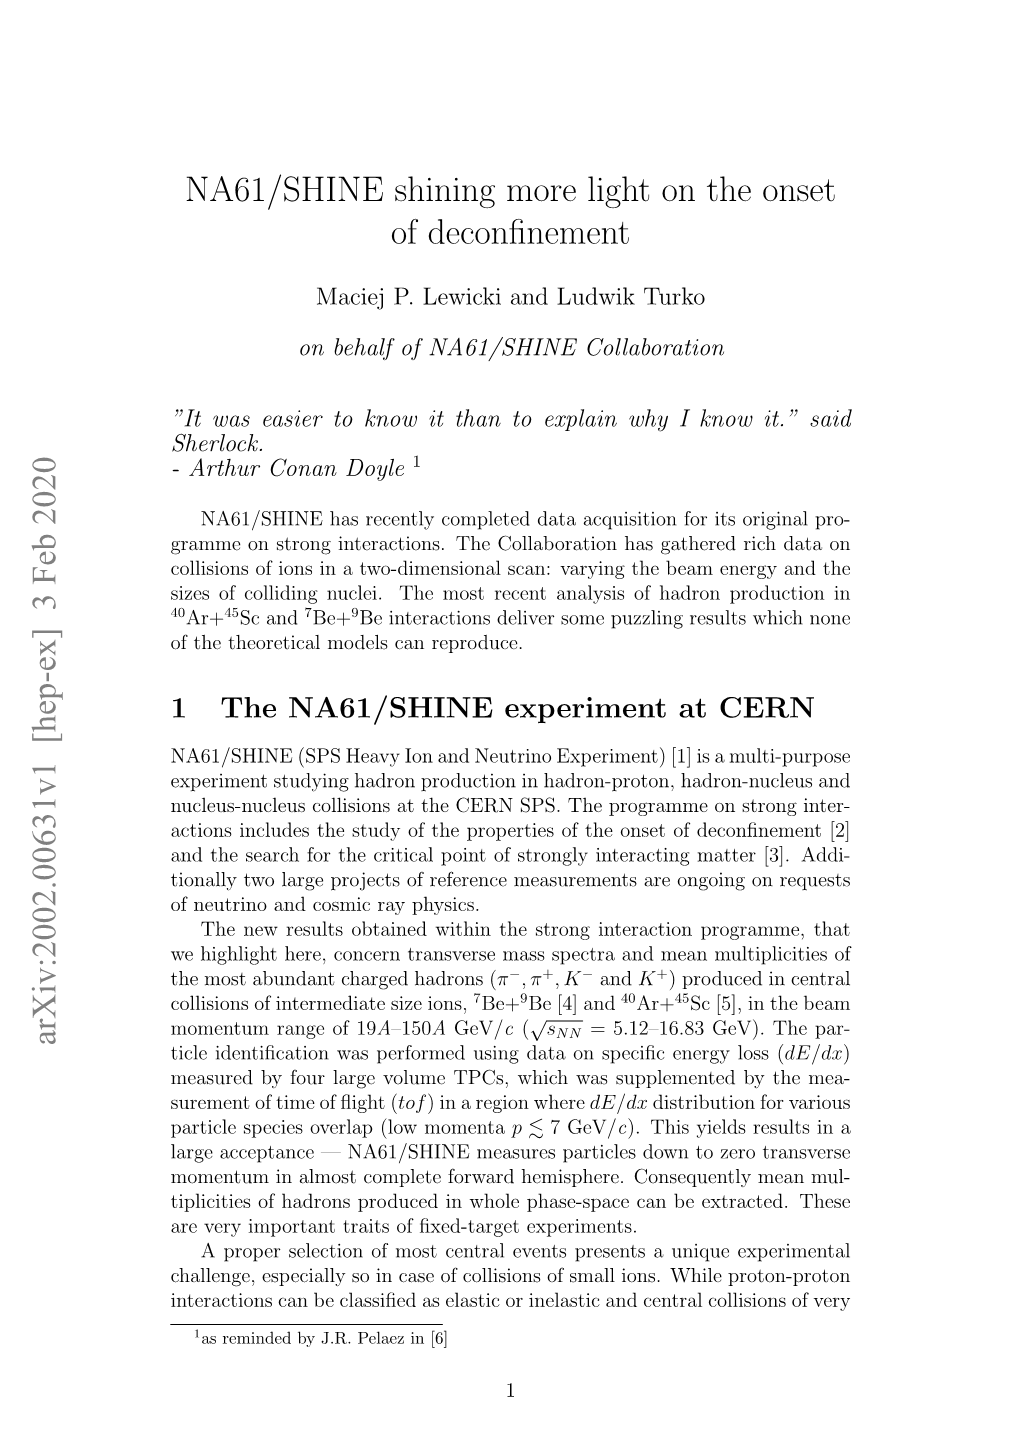 NA61/SHINE Shining More Light on the Onset of Deconfinement Arxiv